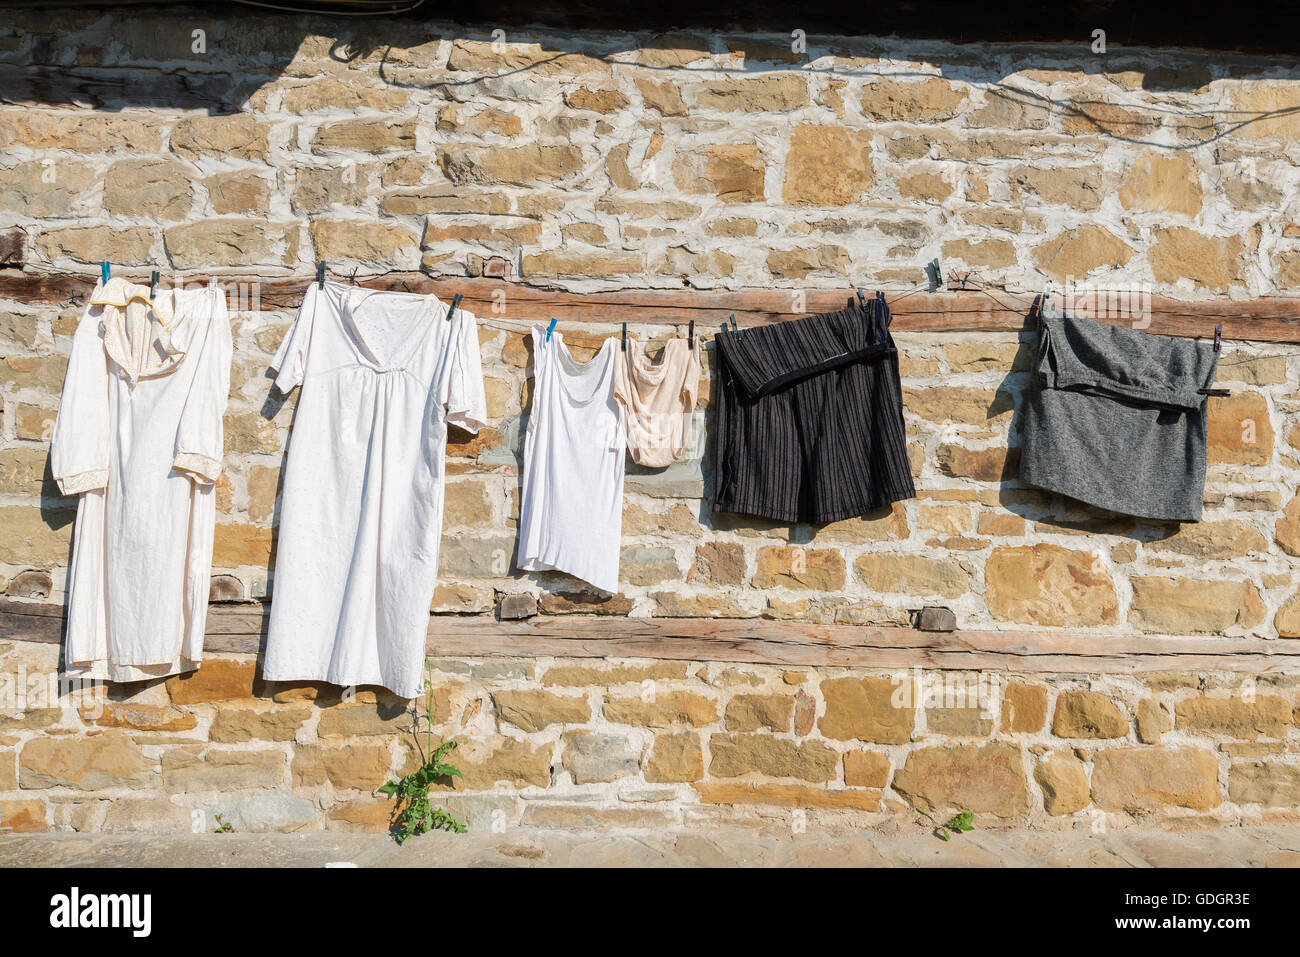 Underwear and clothing hanging drying on ancient stown wall in Tryavna, Bulgaria Stock Photo